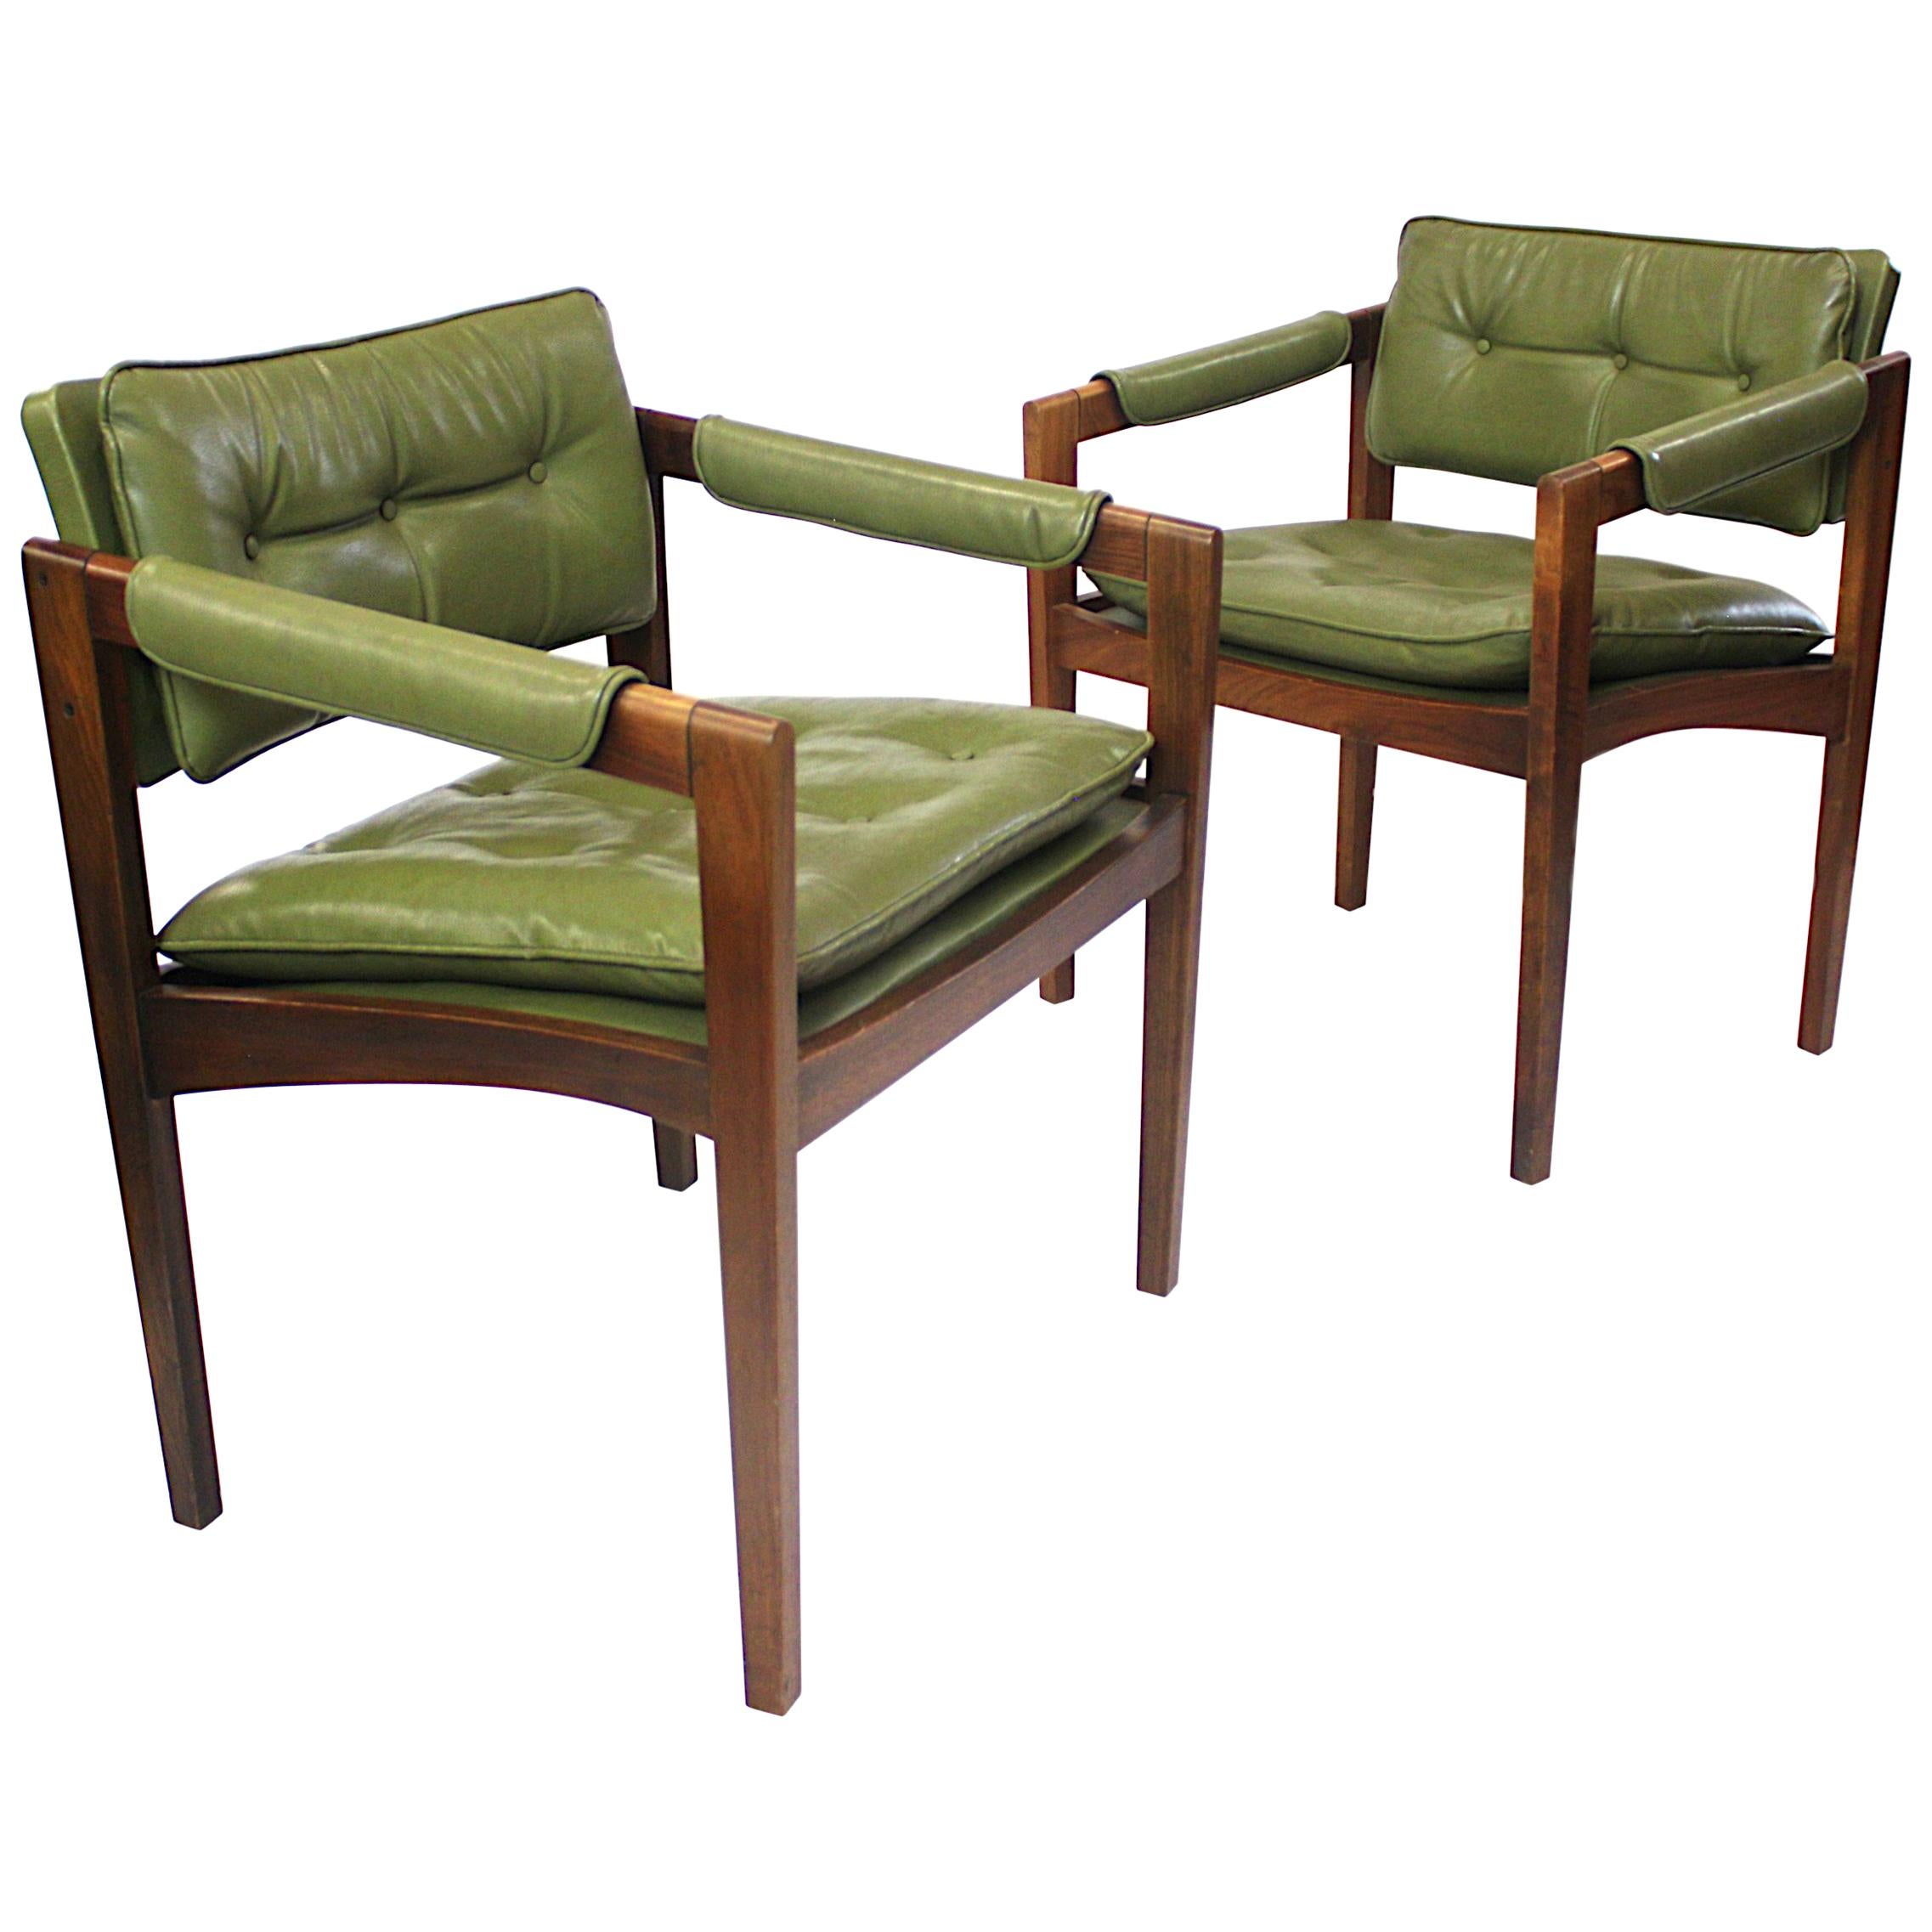 Unusual Pair of Green Mid-Century Modern Lounge Chairs by Glenn of California